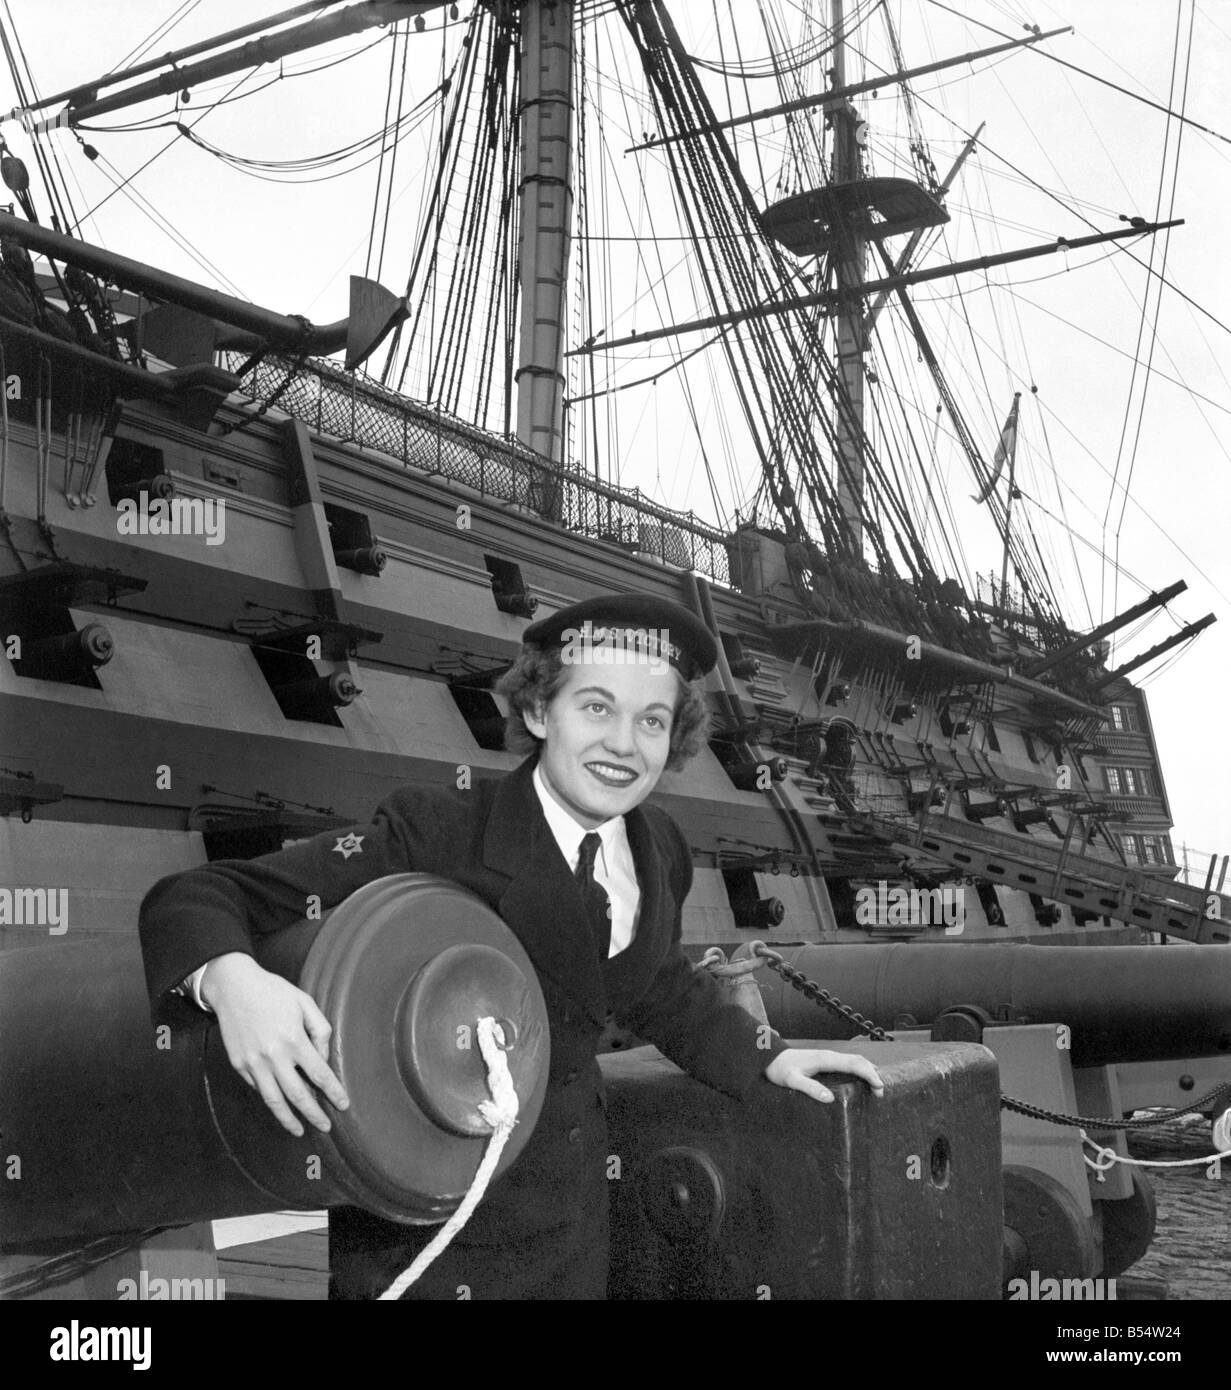 Royal Navy HMS Victory: WREN Margaret Mann 19 a winter in the navy, and Wren Joan Wallen age 20 of Radar Dept. They are intersted in a rum measure used aboard. The victory in Nelson days. October 1953 D6153 Stock Photo